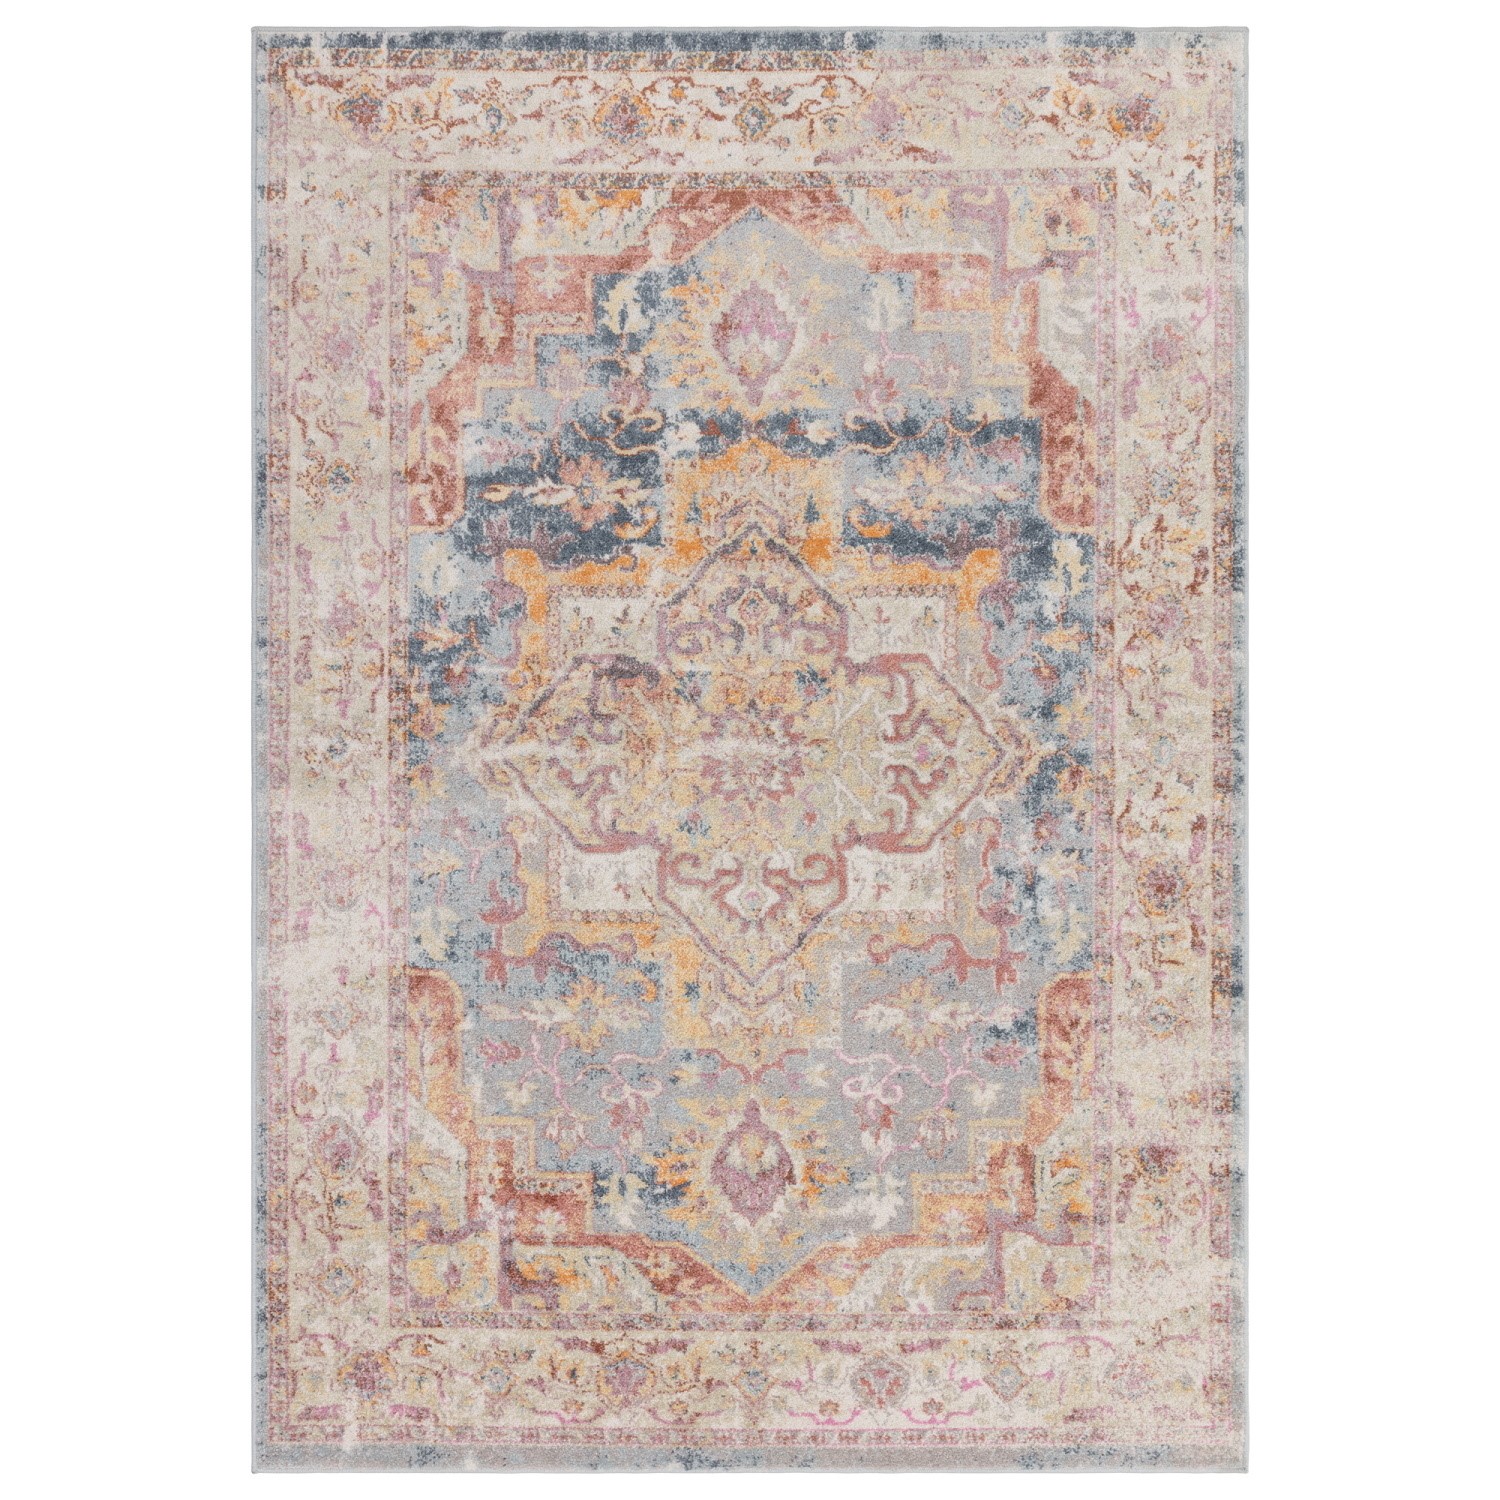 Photo of Persian distressed rug - 120x170cm - flores